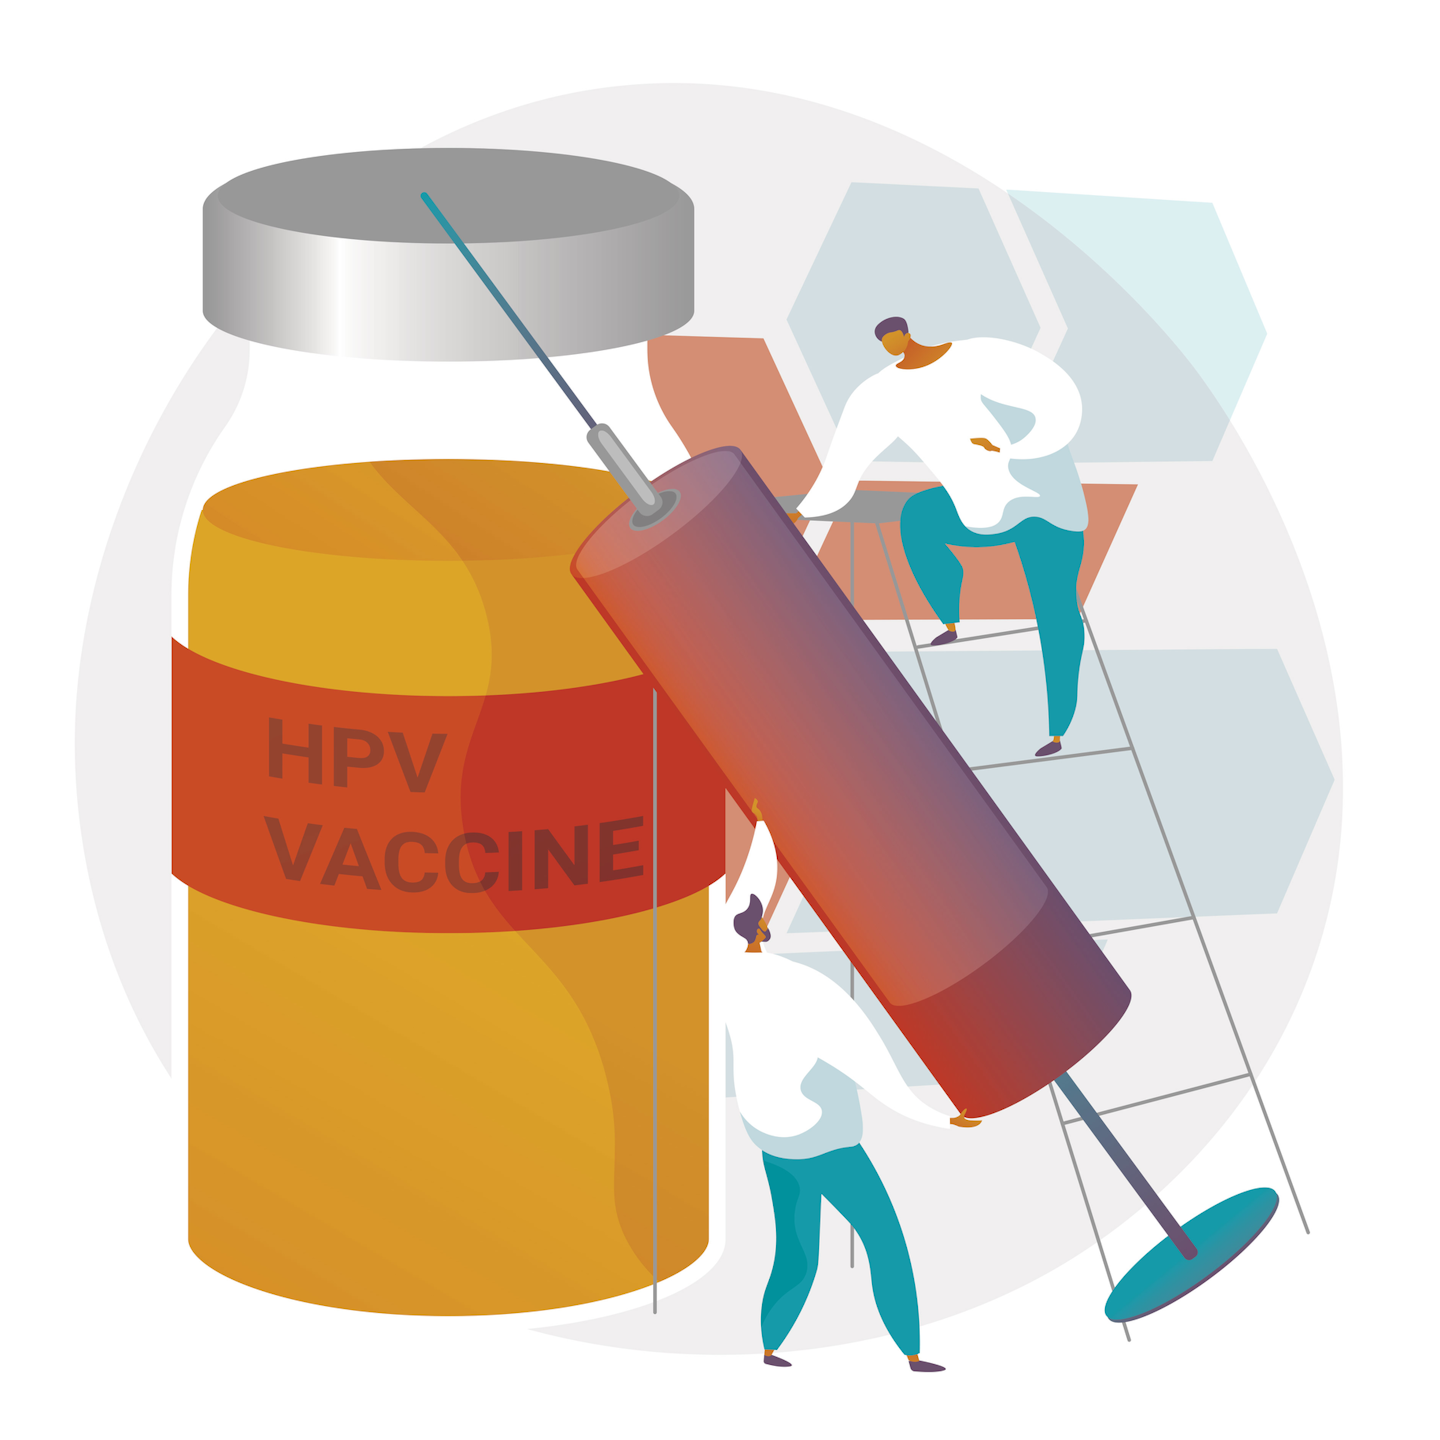 EBSCOhost | | HPV vaccine and oropharingeal cancer: what we know and what we don’t know.